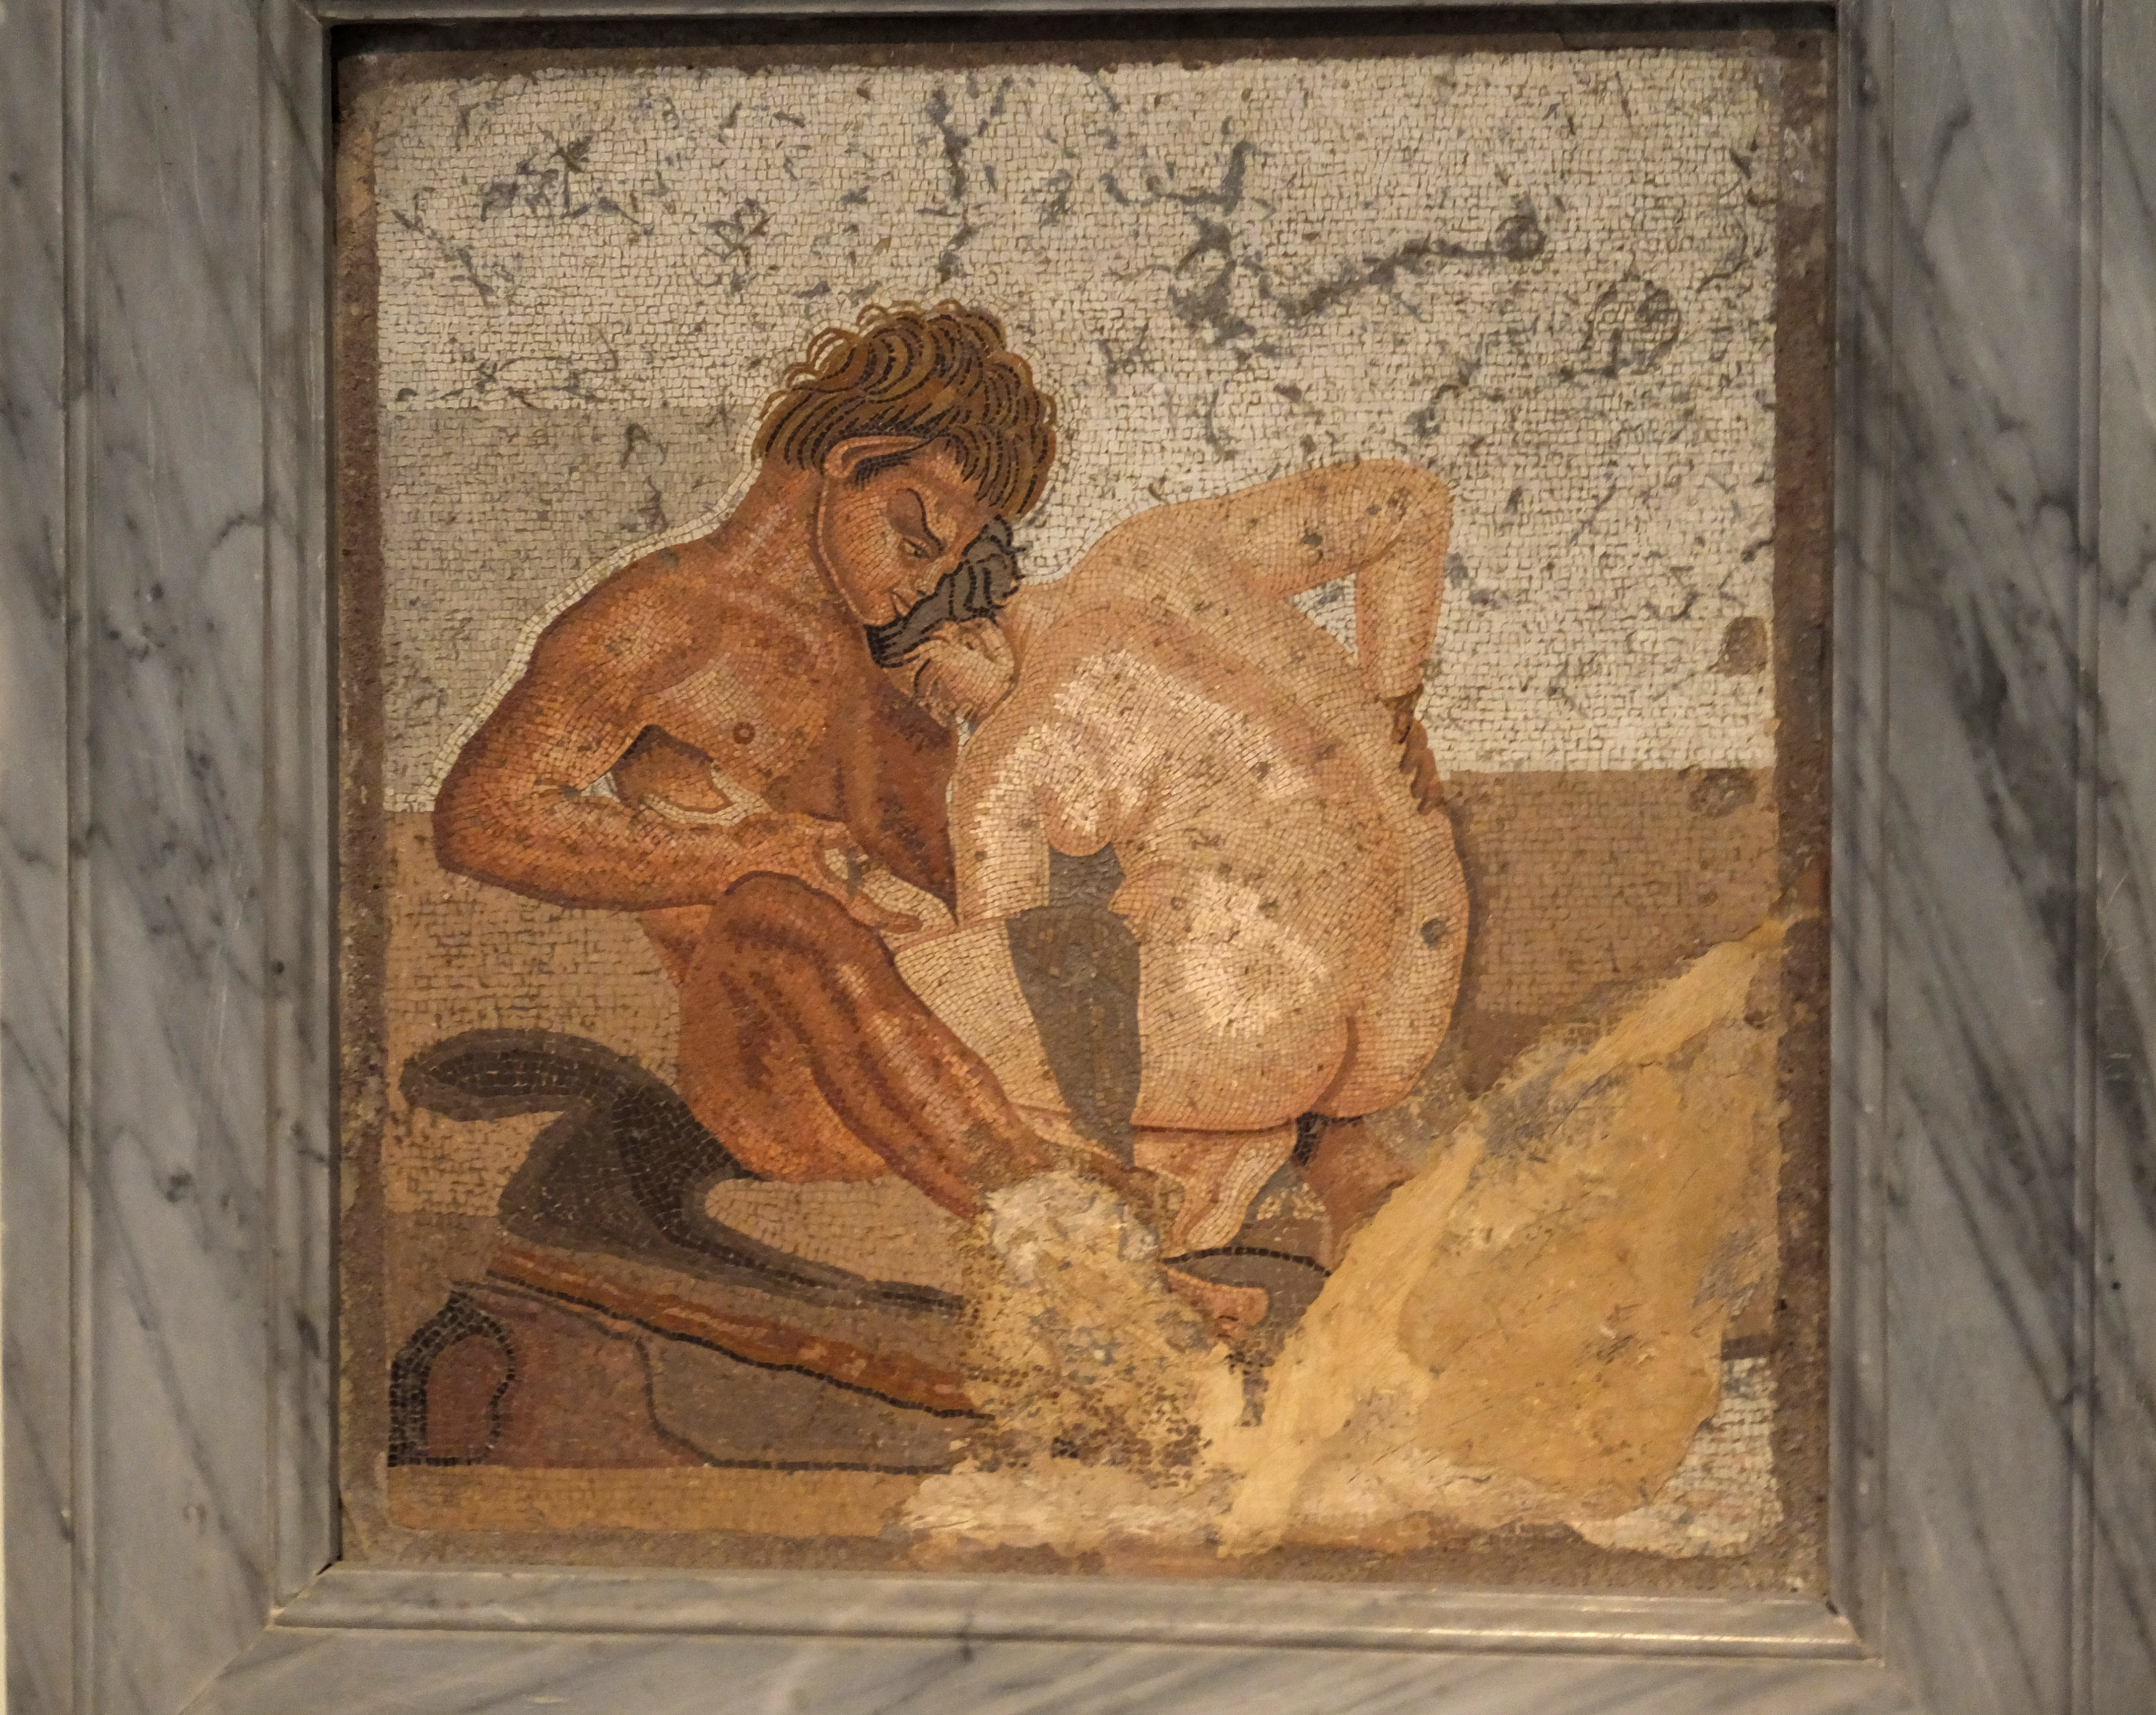 Ancient Roman Anal - Sexuality in ancient Rome - Wikipedia